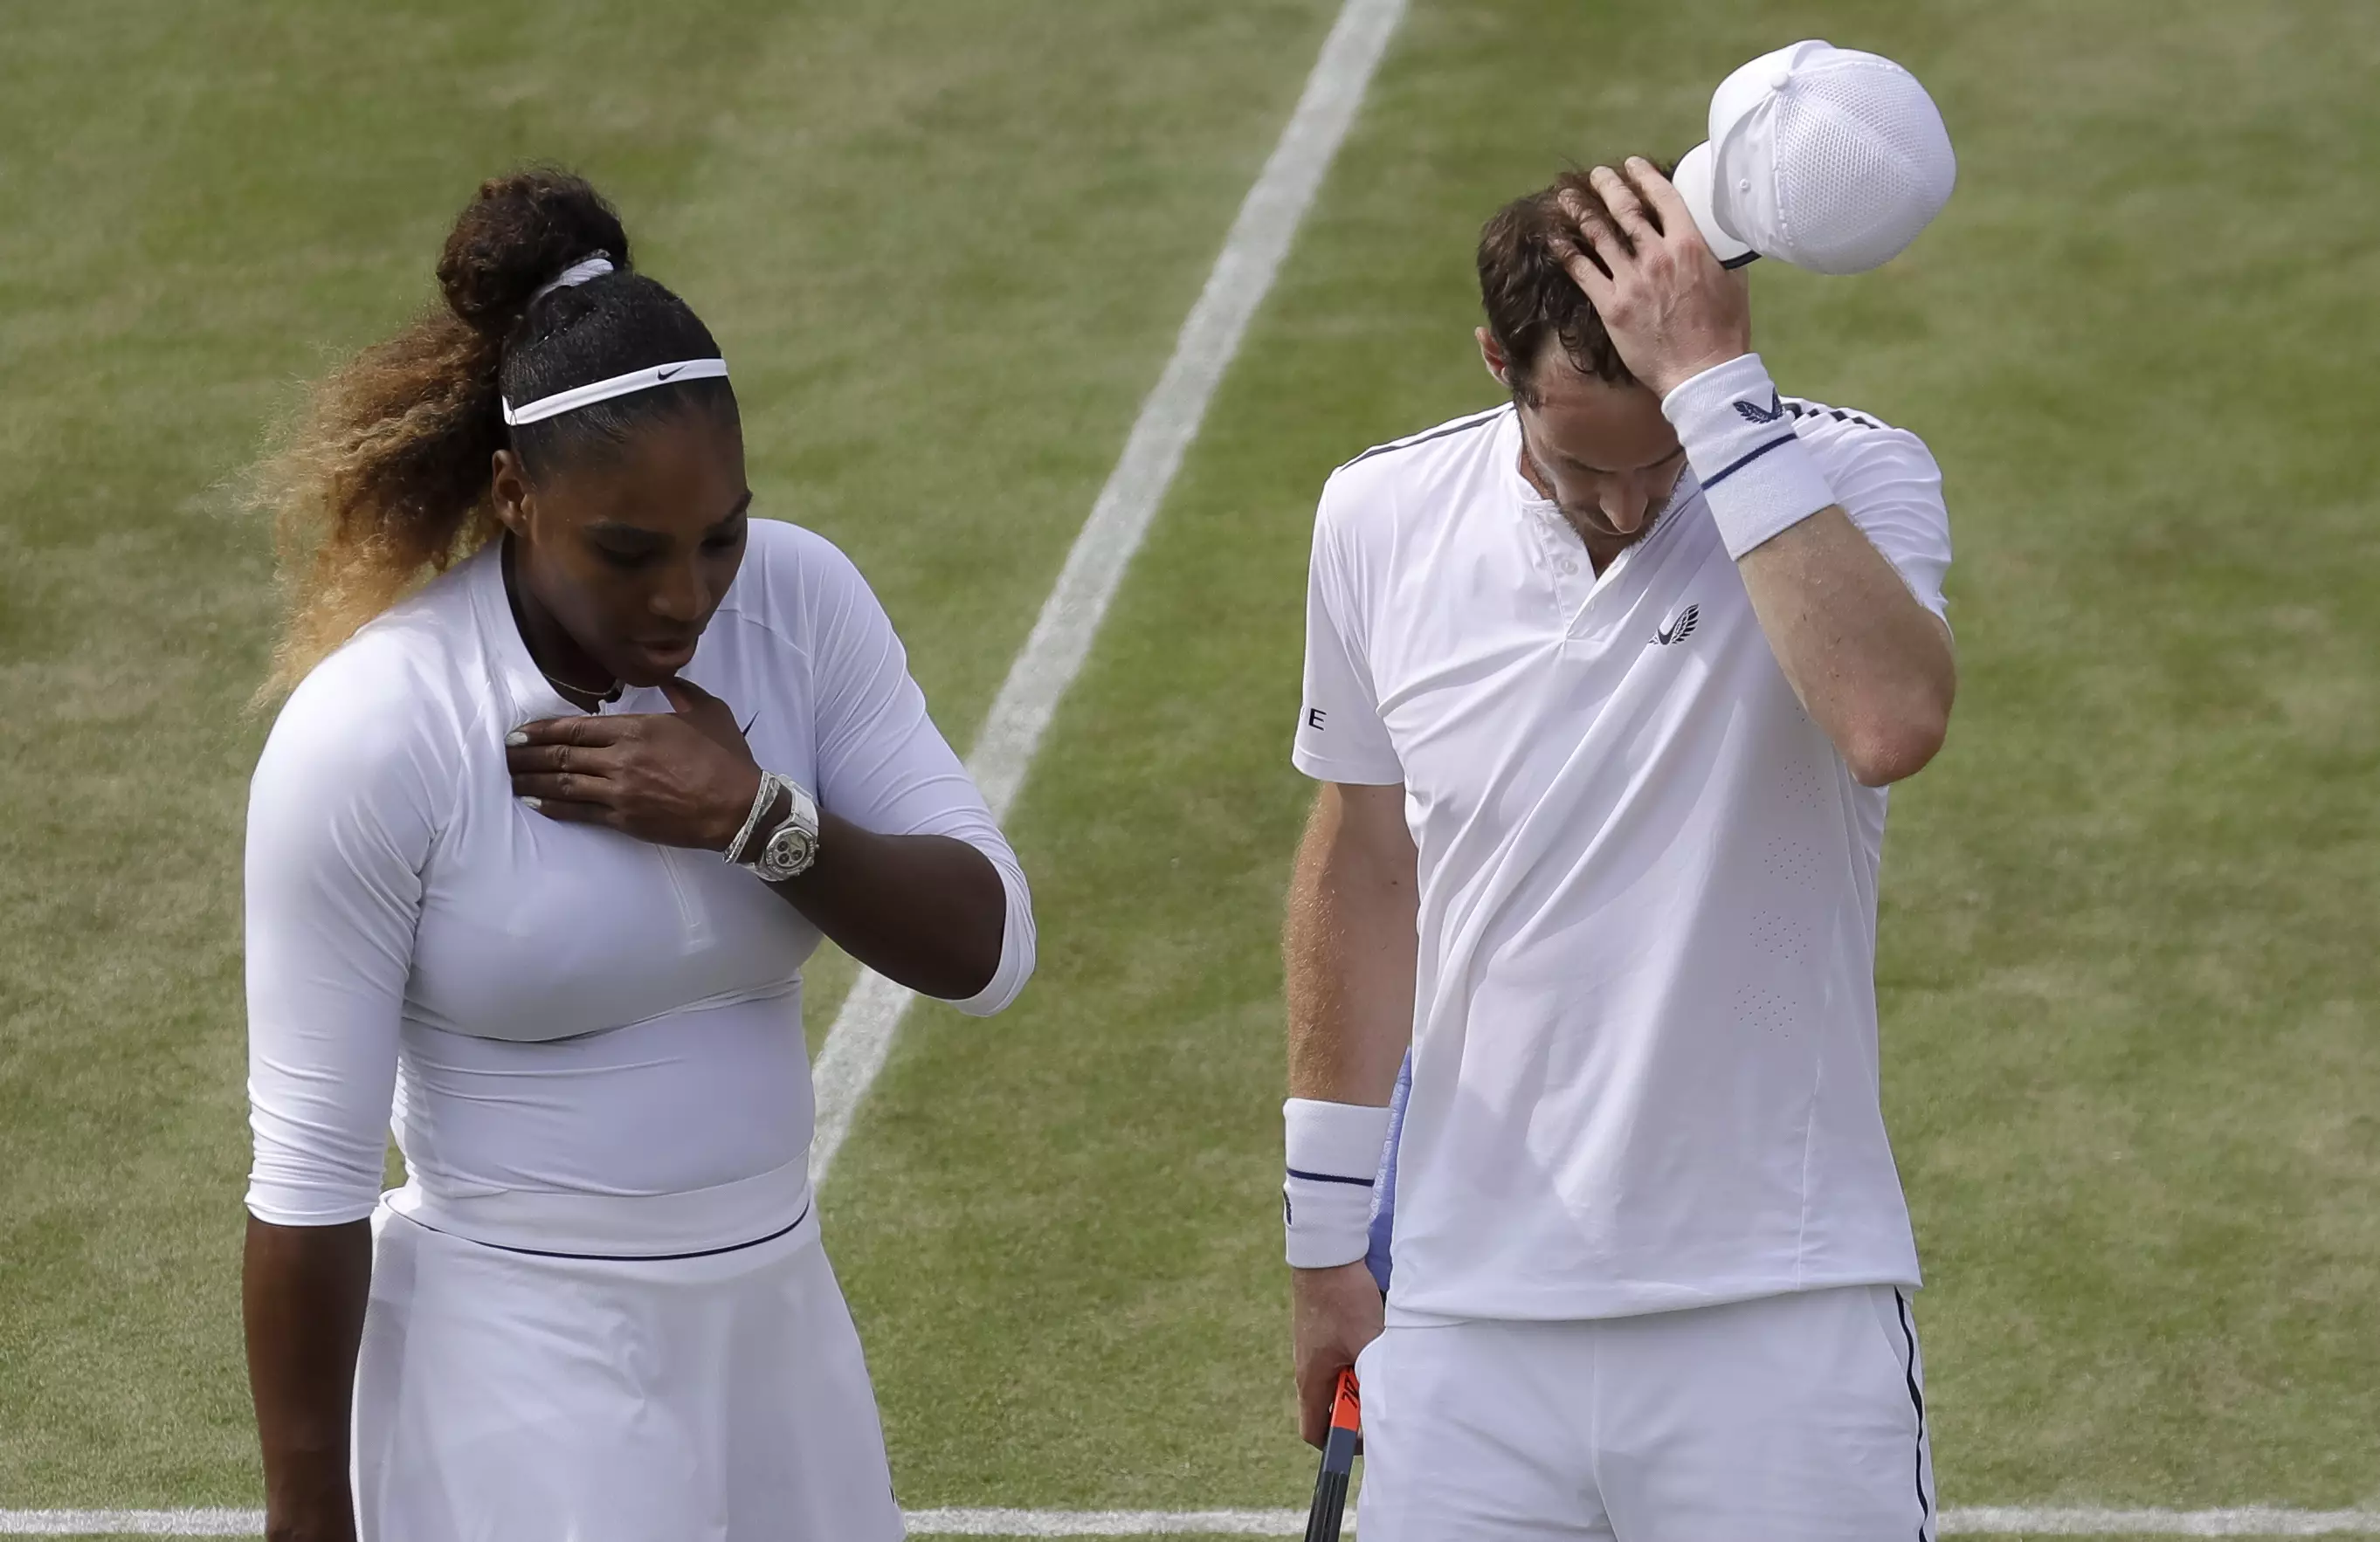 Williams and Murray are out of the mixed doubles competition.